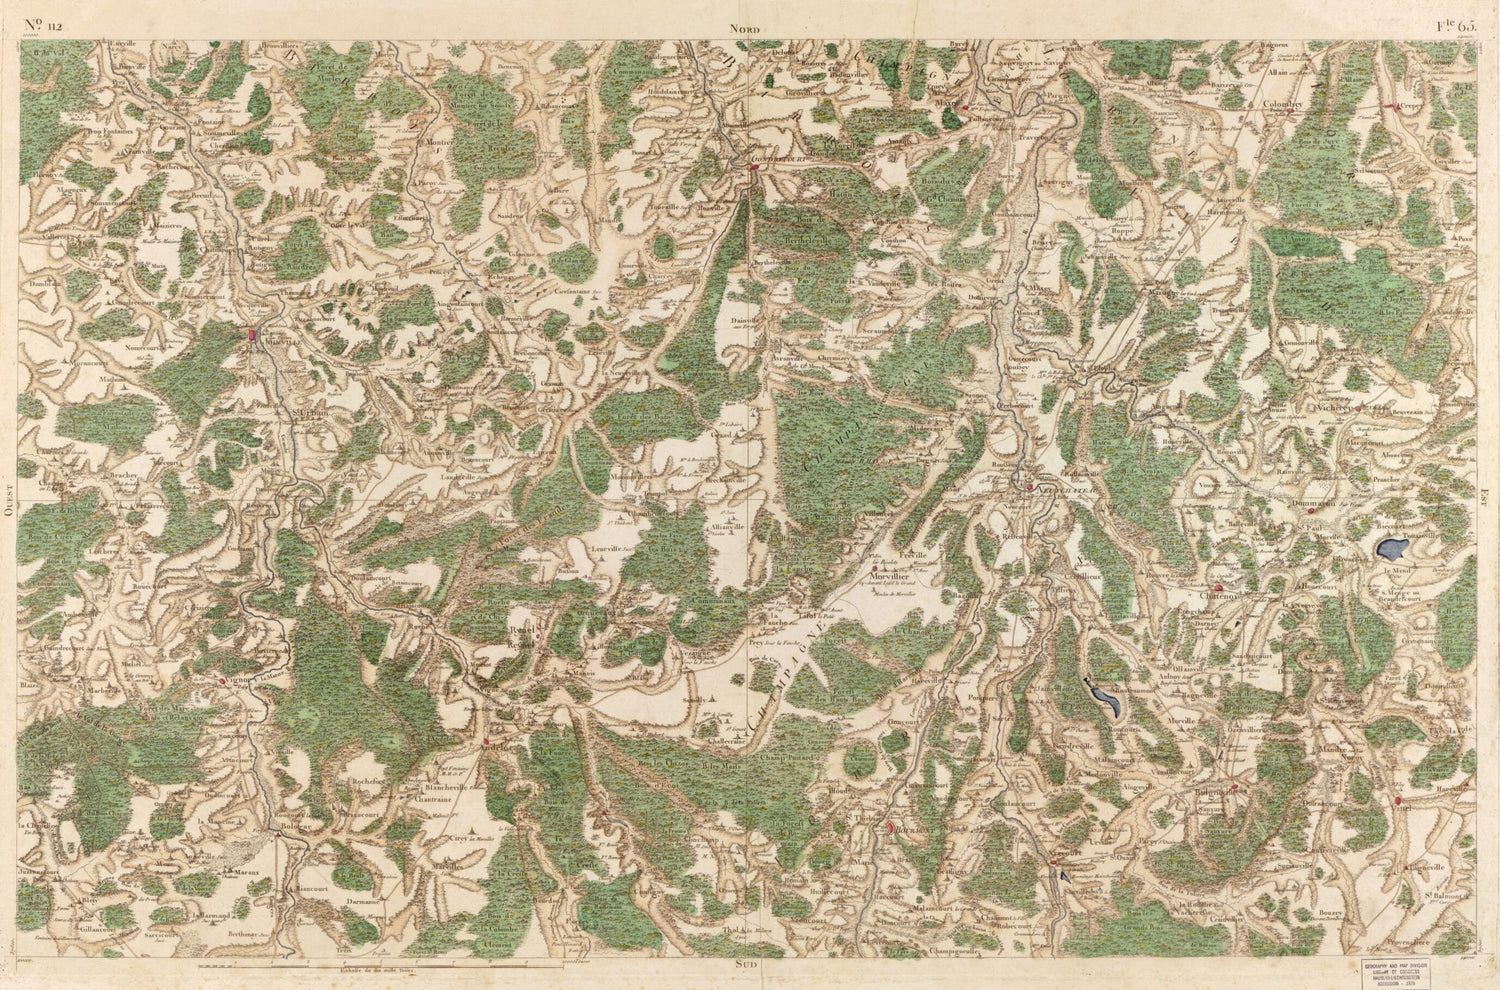 This old map of Image 117 from Carte De France from 1756 was created by  Société De La Carte De France in 1756